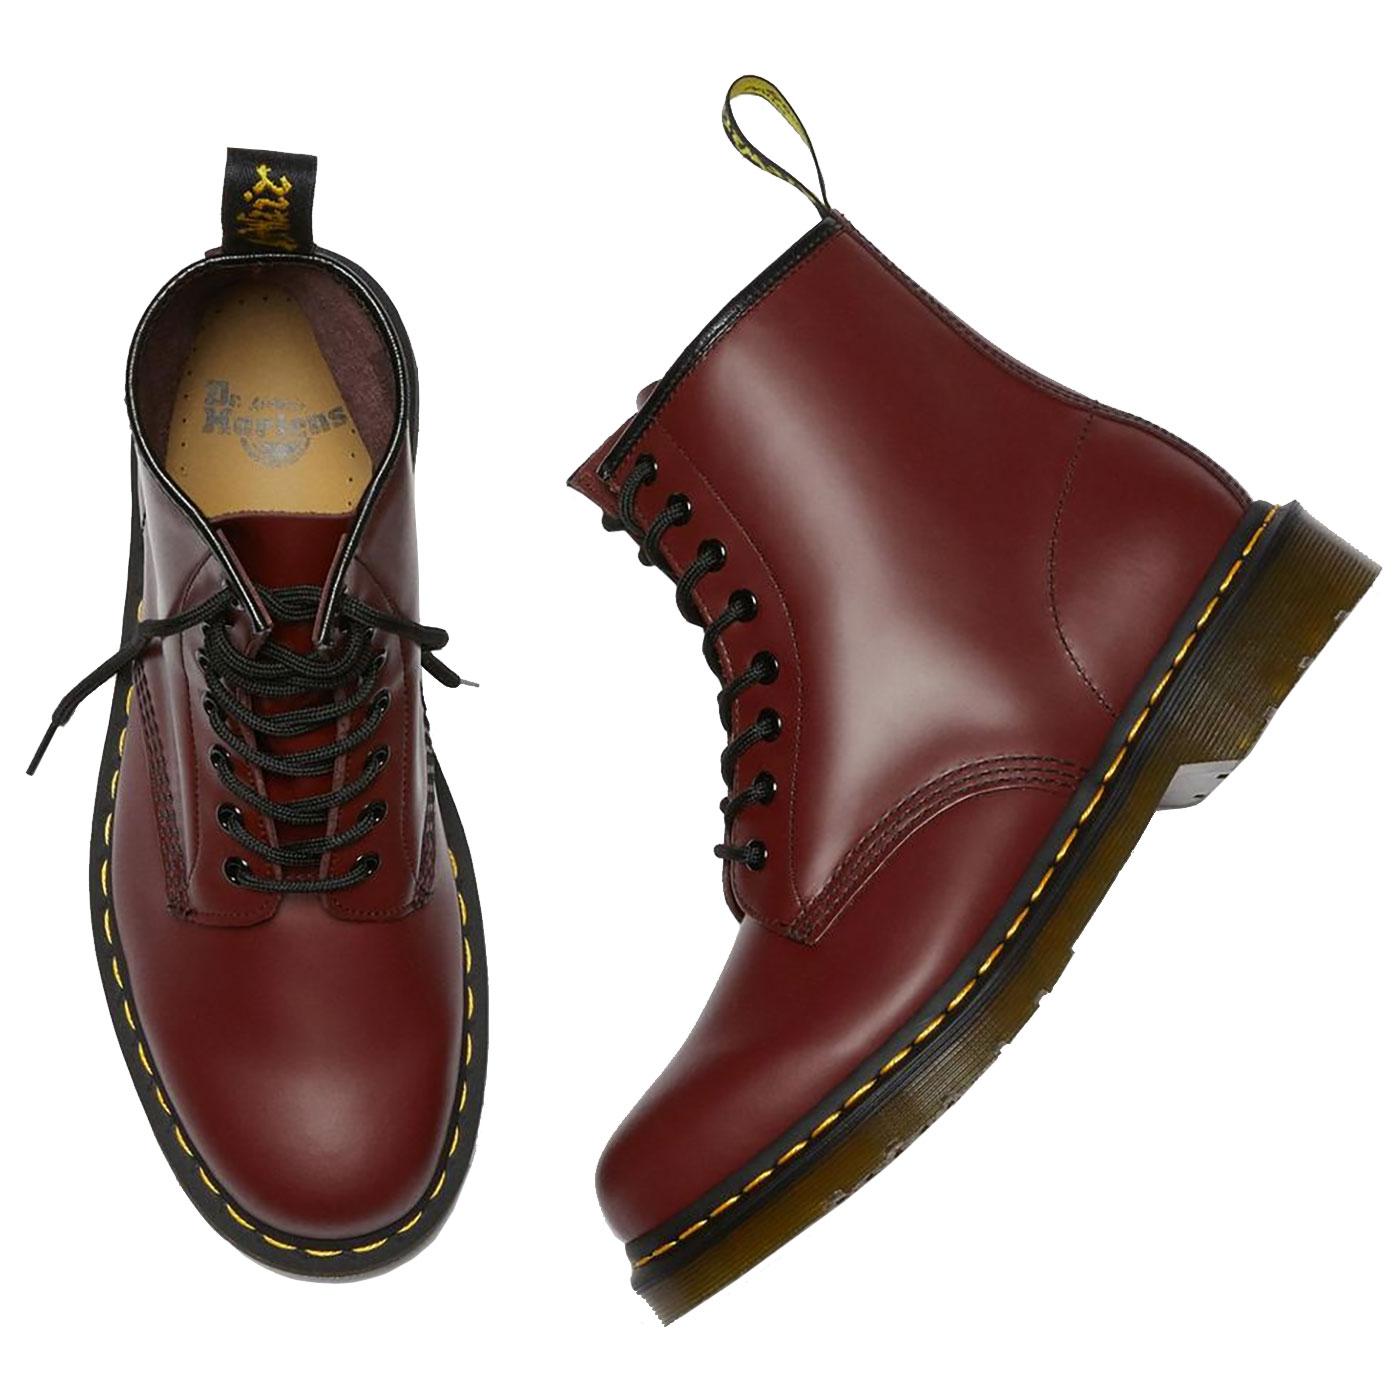 DR MARTENS 1460 Womens Retro Mod Smooth Cherry Leather Boots